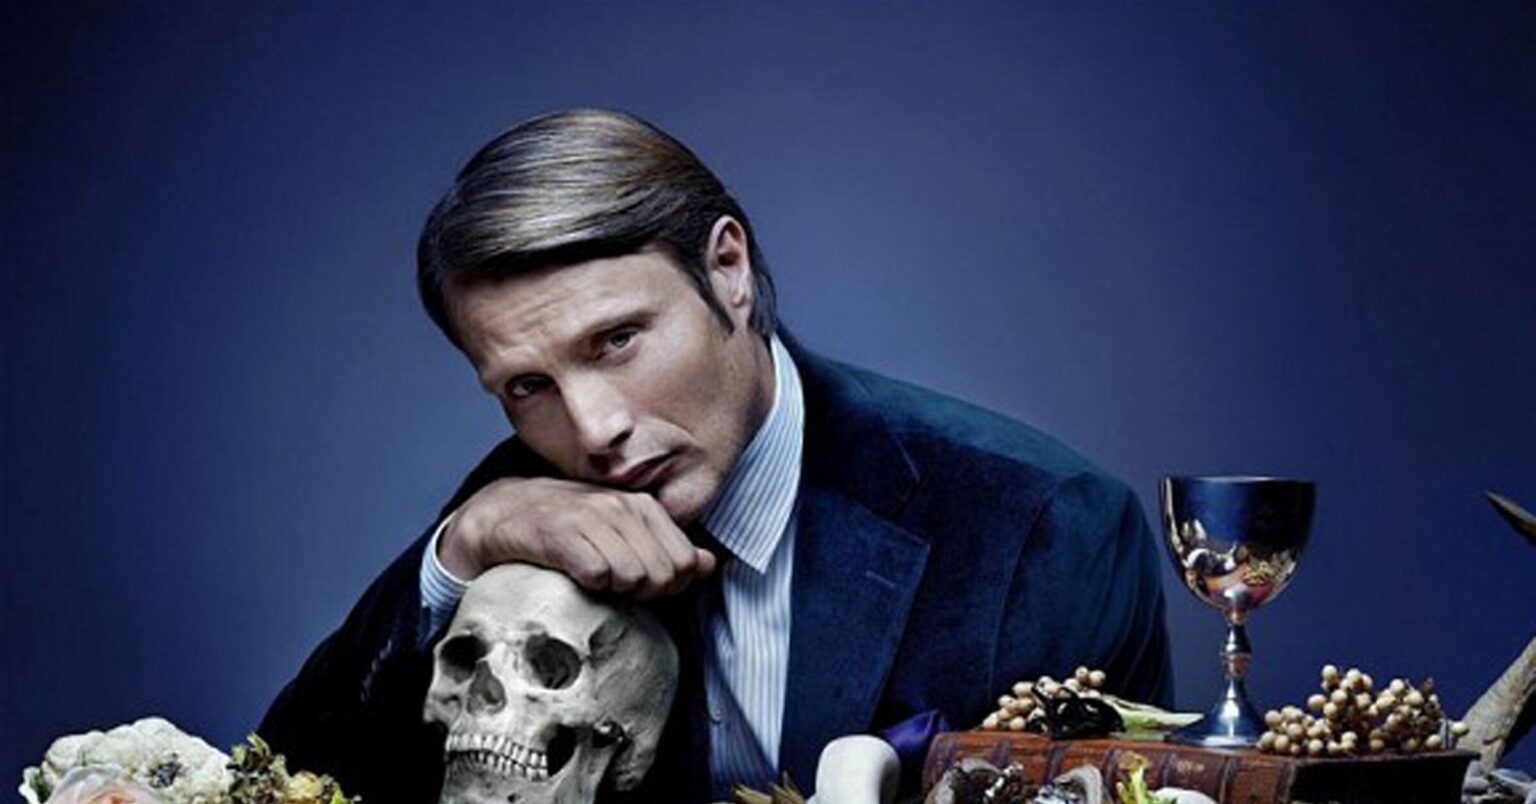 Is it possible five years later to get that 'Hannibal' season 4? Fans are hoping that the streaming giant Netflix could maybe resurrect the series.